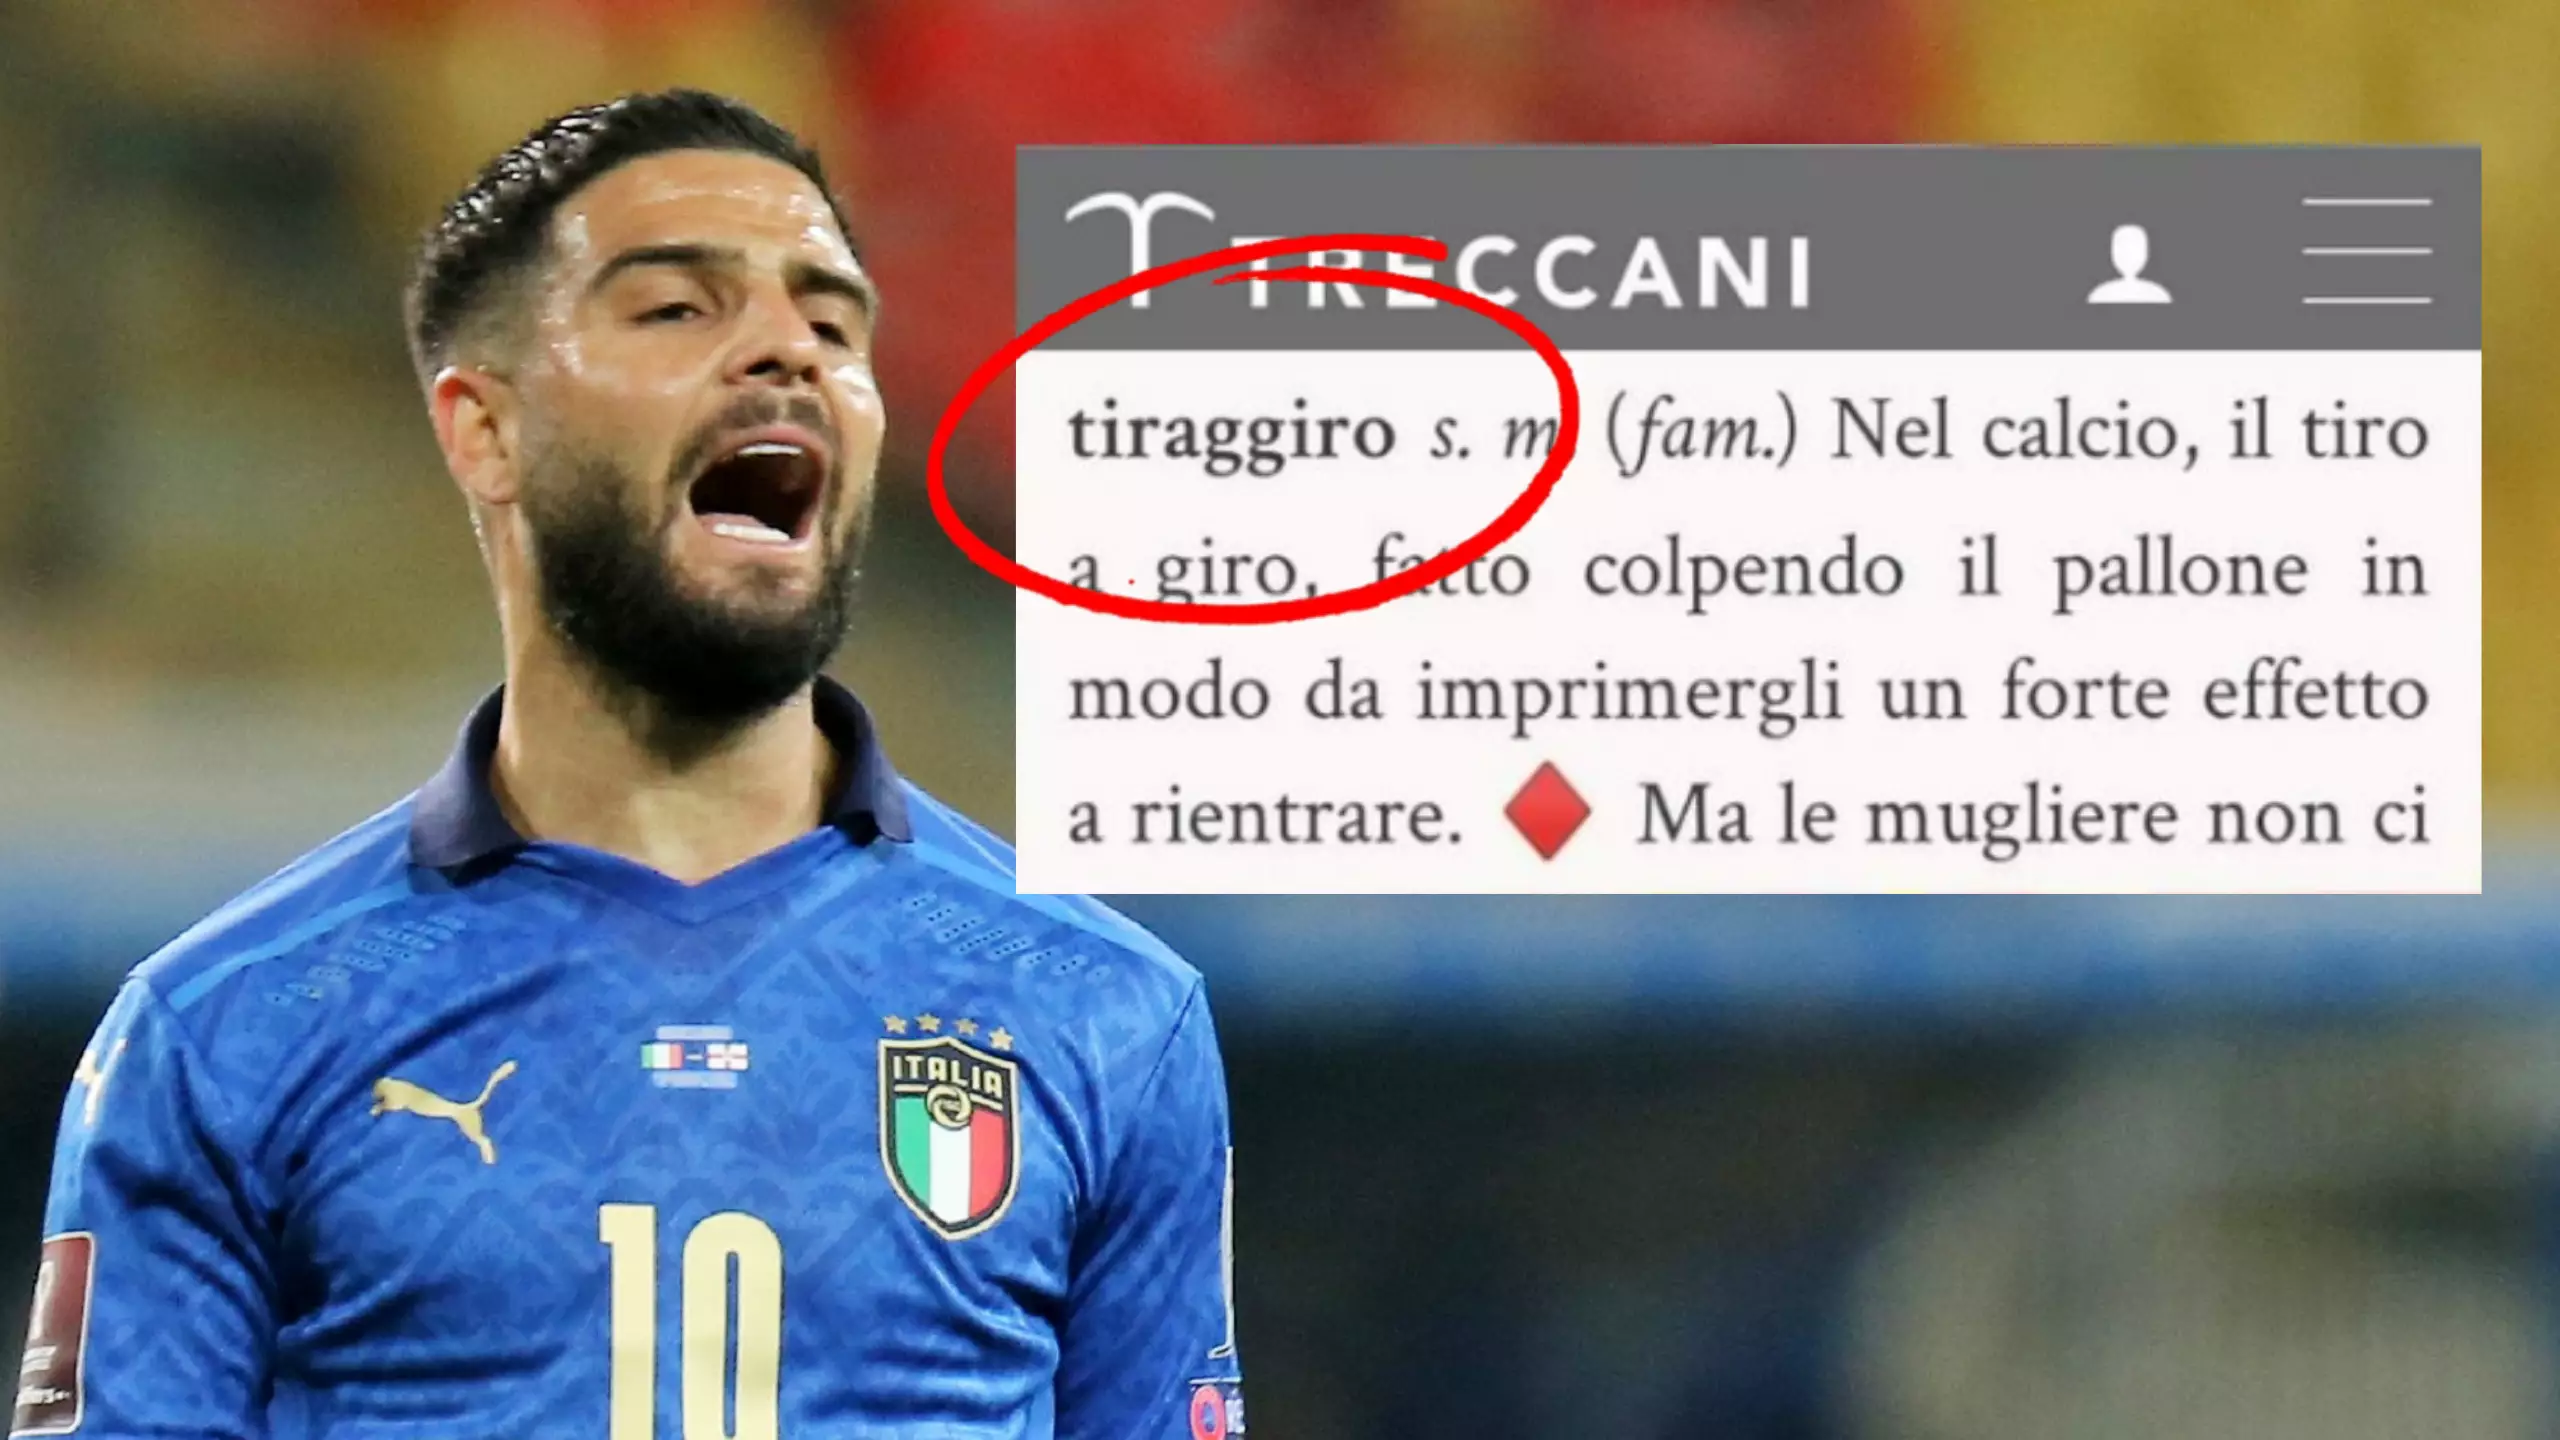 Lorenzo Insigne Is Responsible For A Word In The Italian Dictionary After Euro 2020 Heroics